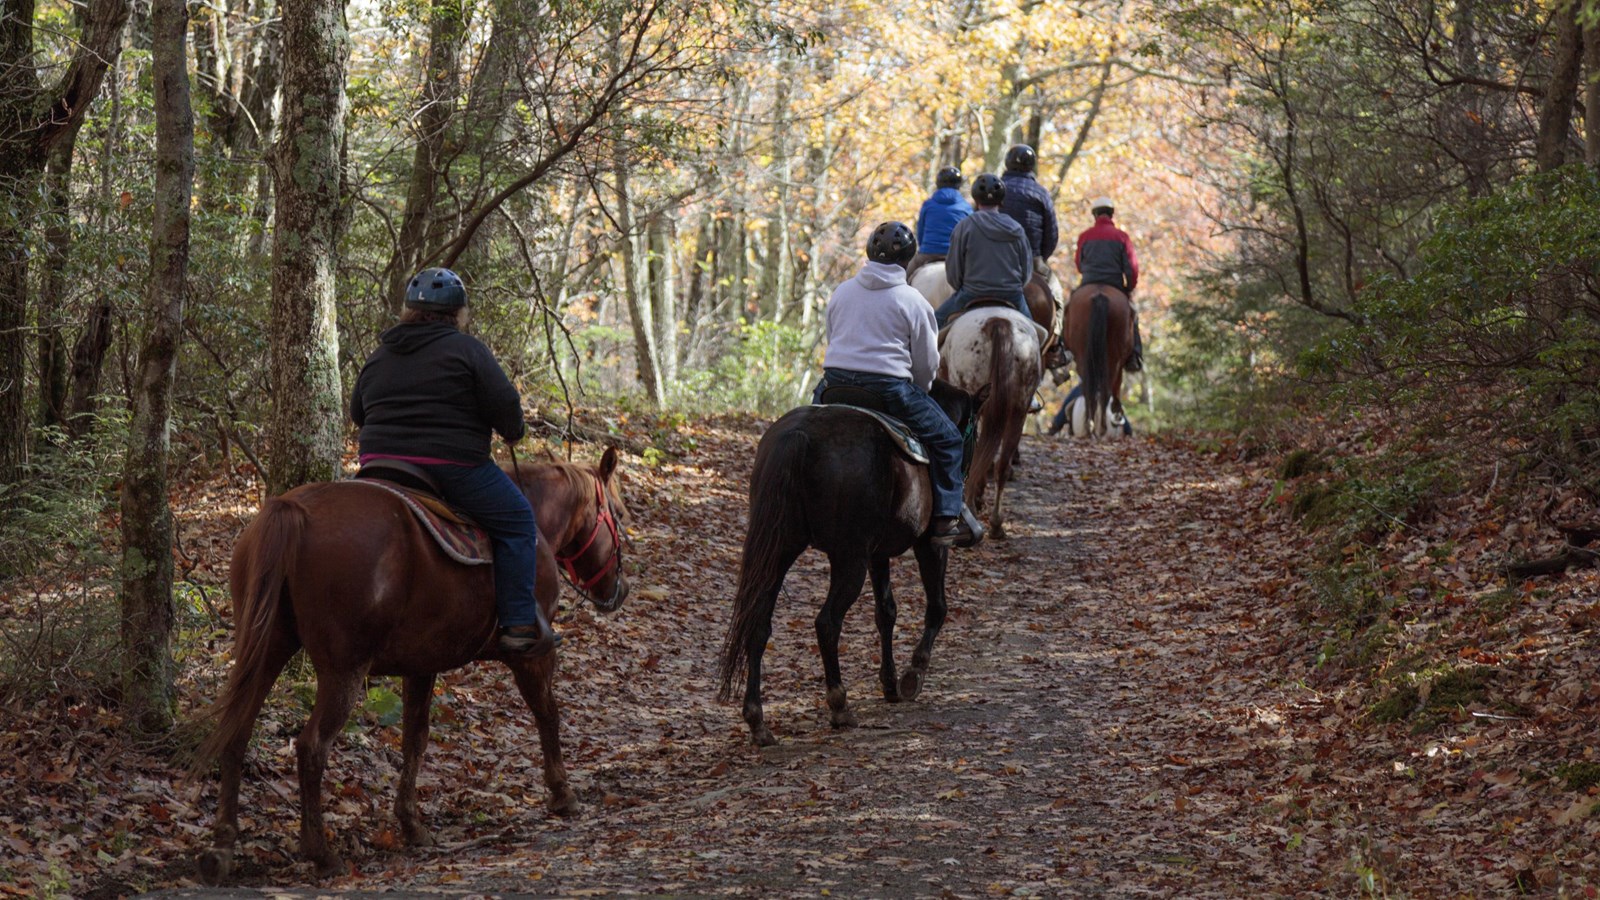 A line of people on horseback ride down a dirt trail in a green forest.